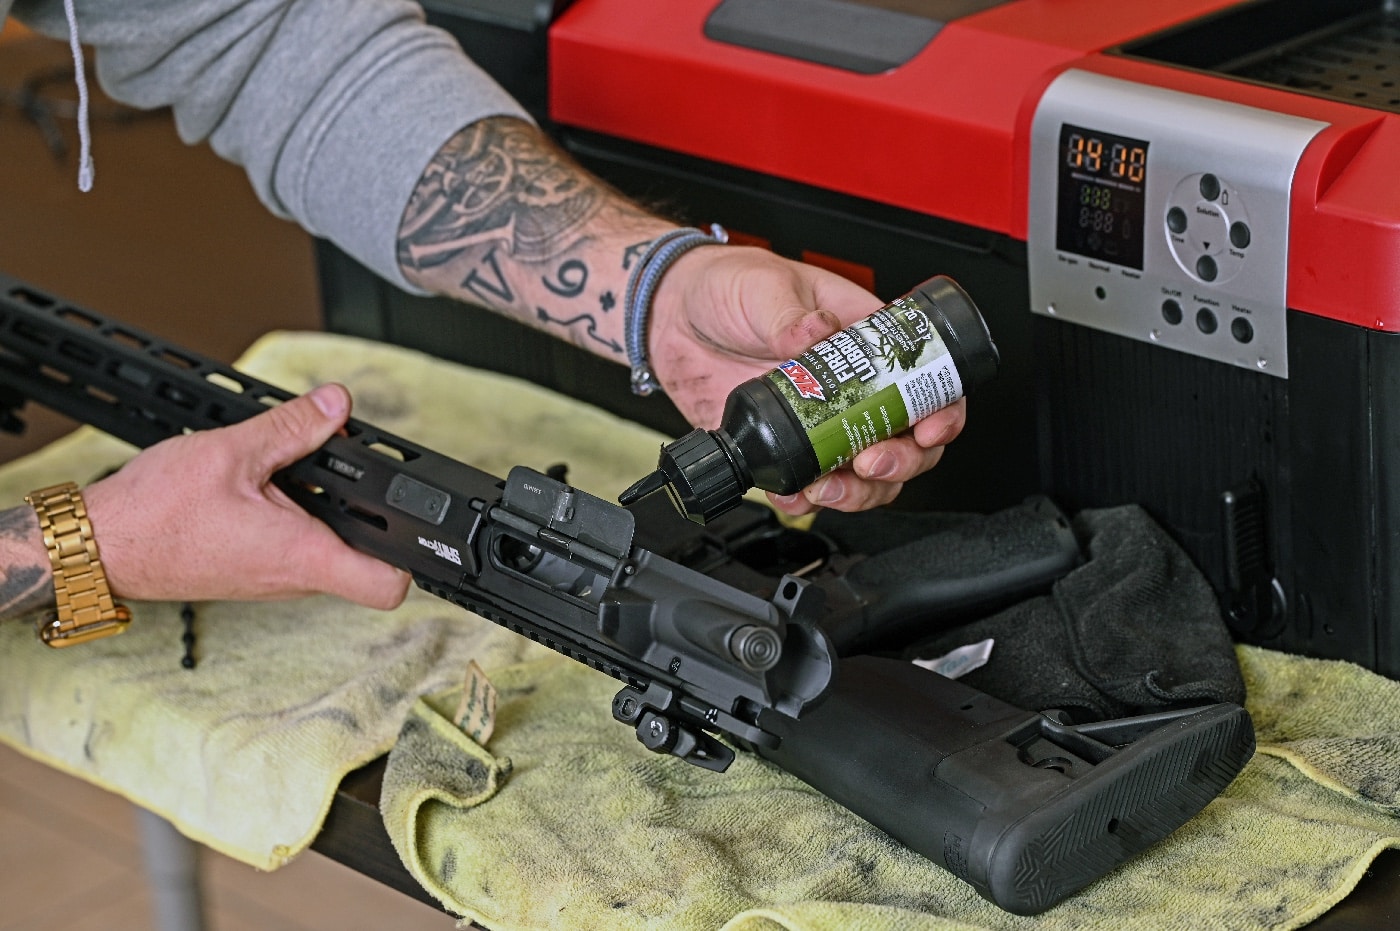 In this photo, the author adds a thin film of lube to his firearm after pulling it from the Hornady Lock-n-Load Hot Tub Sonic Cleaner. When you pull it out of the tub, be sure to wipe it down and blow it off if you have an air compressor to ensure all of the cleaning fluid is removed. Then add a bit of oil to reduce wear.